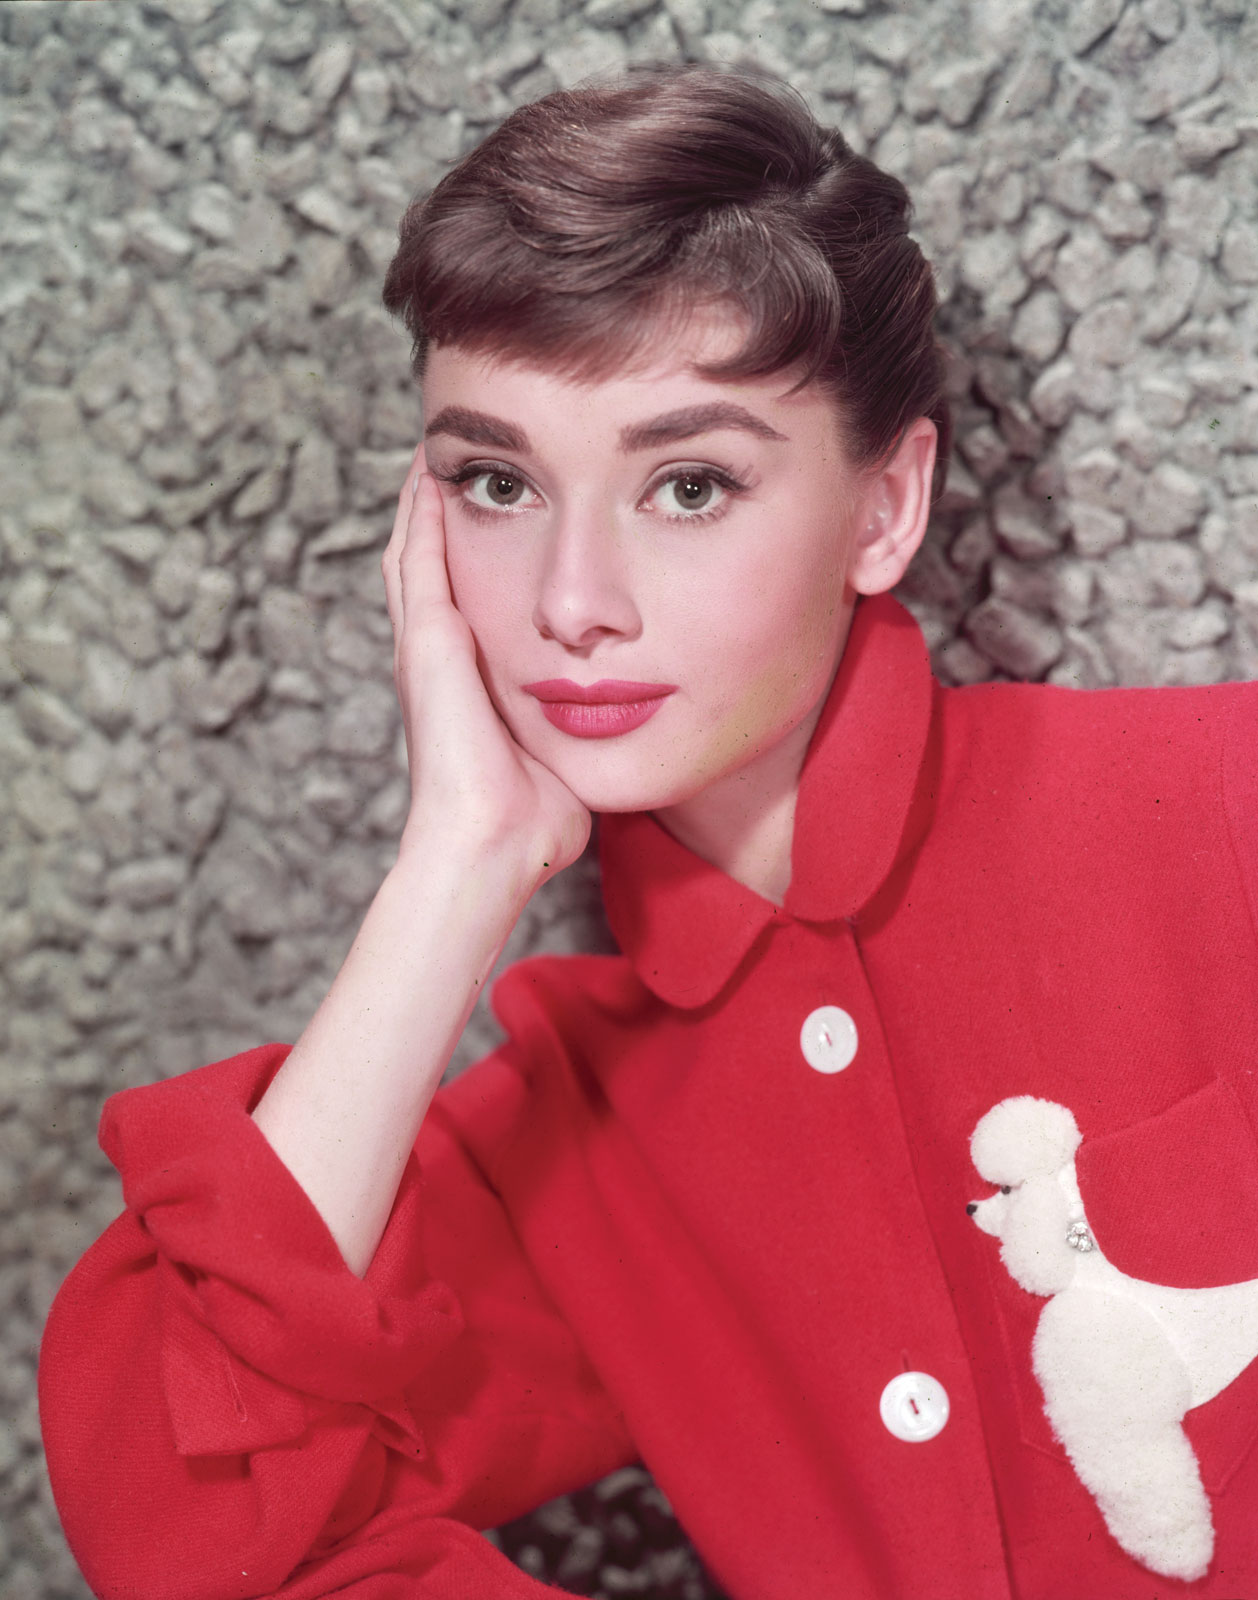 Hepburn in a red blouse with a white poodle decoration leaning on her hand 